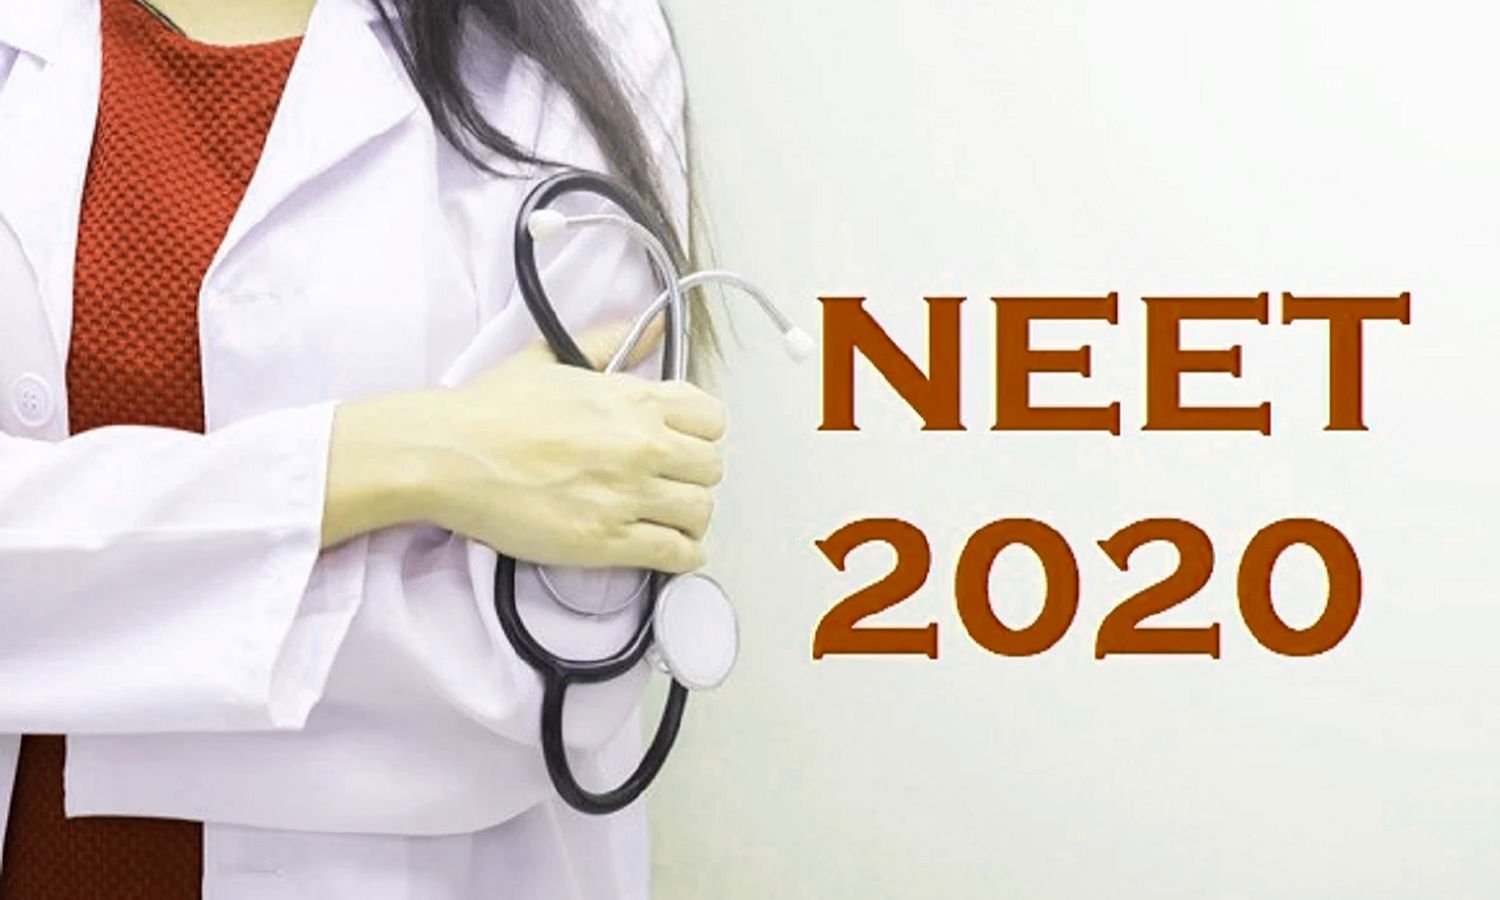 You are currently viewing NEET 2020: NATIONAL TESTING AGENCY MOST LIKELY TO RELEASE THE NEET RESULTS TODAY